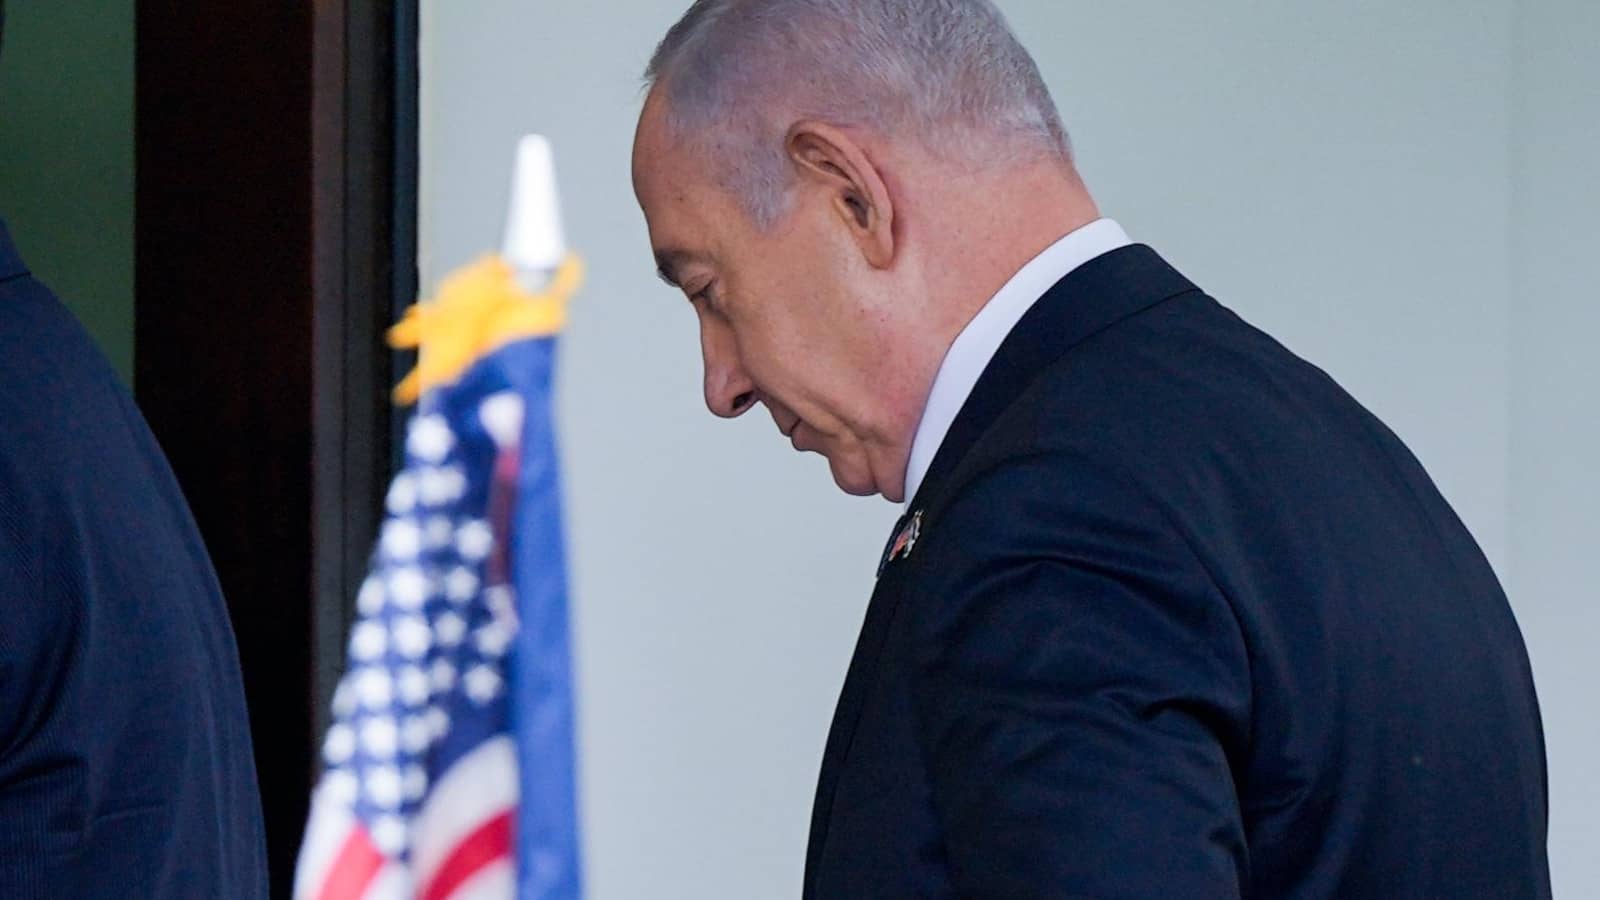 Netanyahu meets with Biden and Harris at a crucial moment for the US and Israel